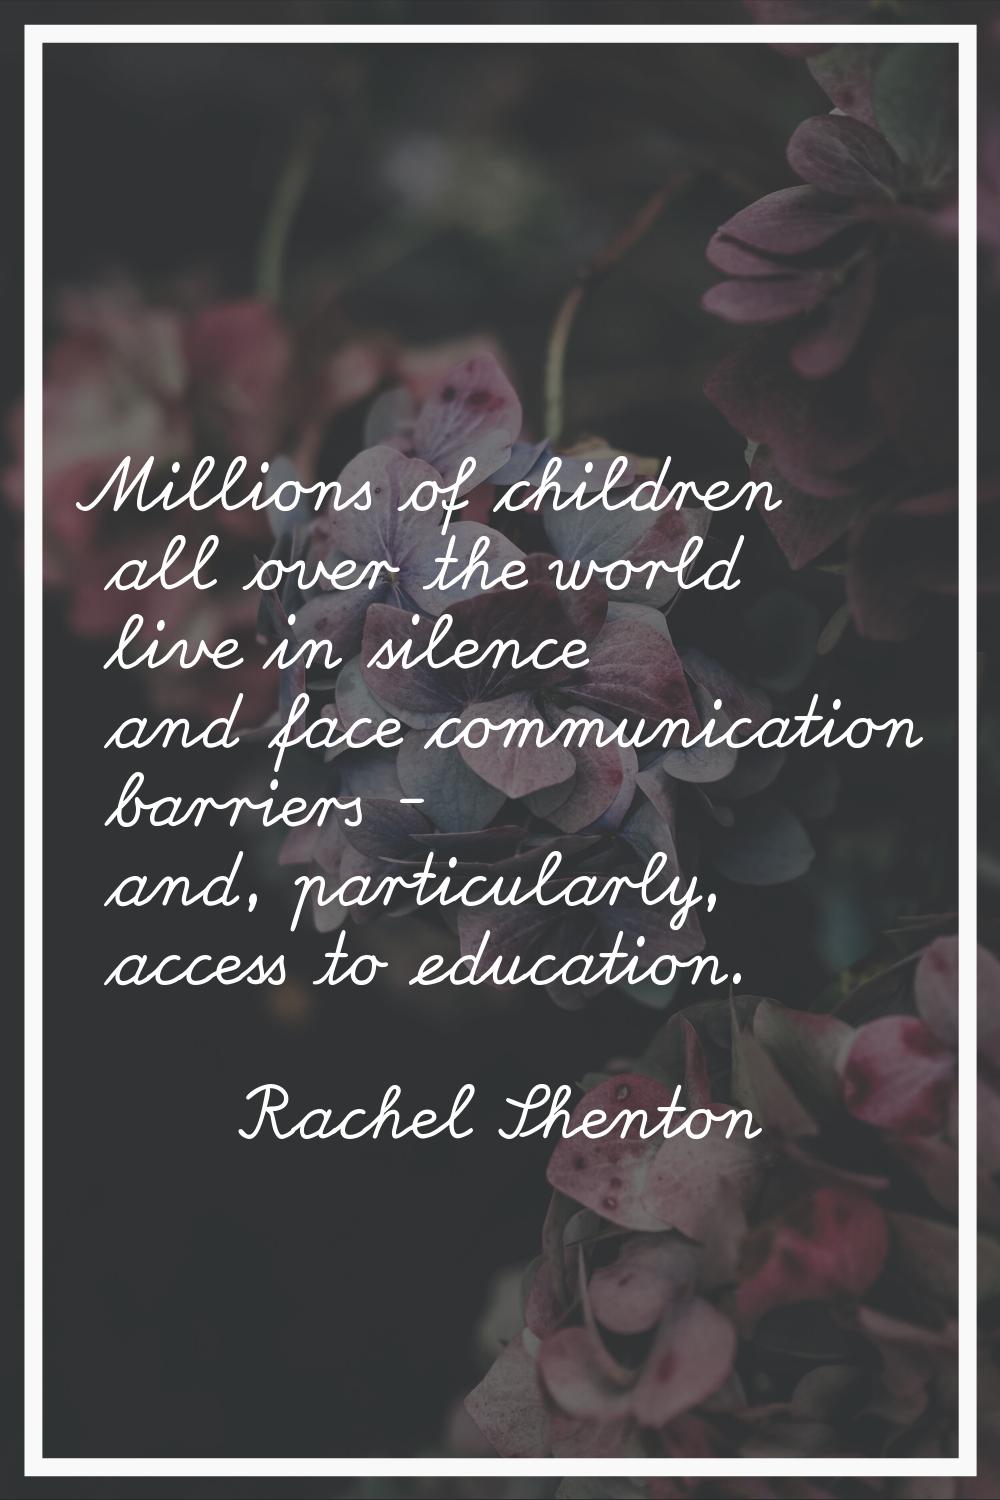 Millions of children all over the world live in silence and face communication barriers - and, part